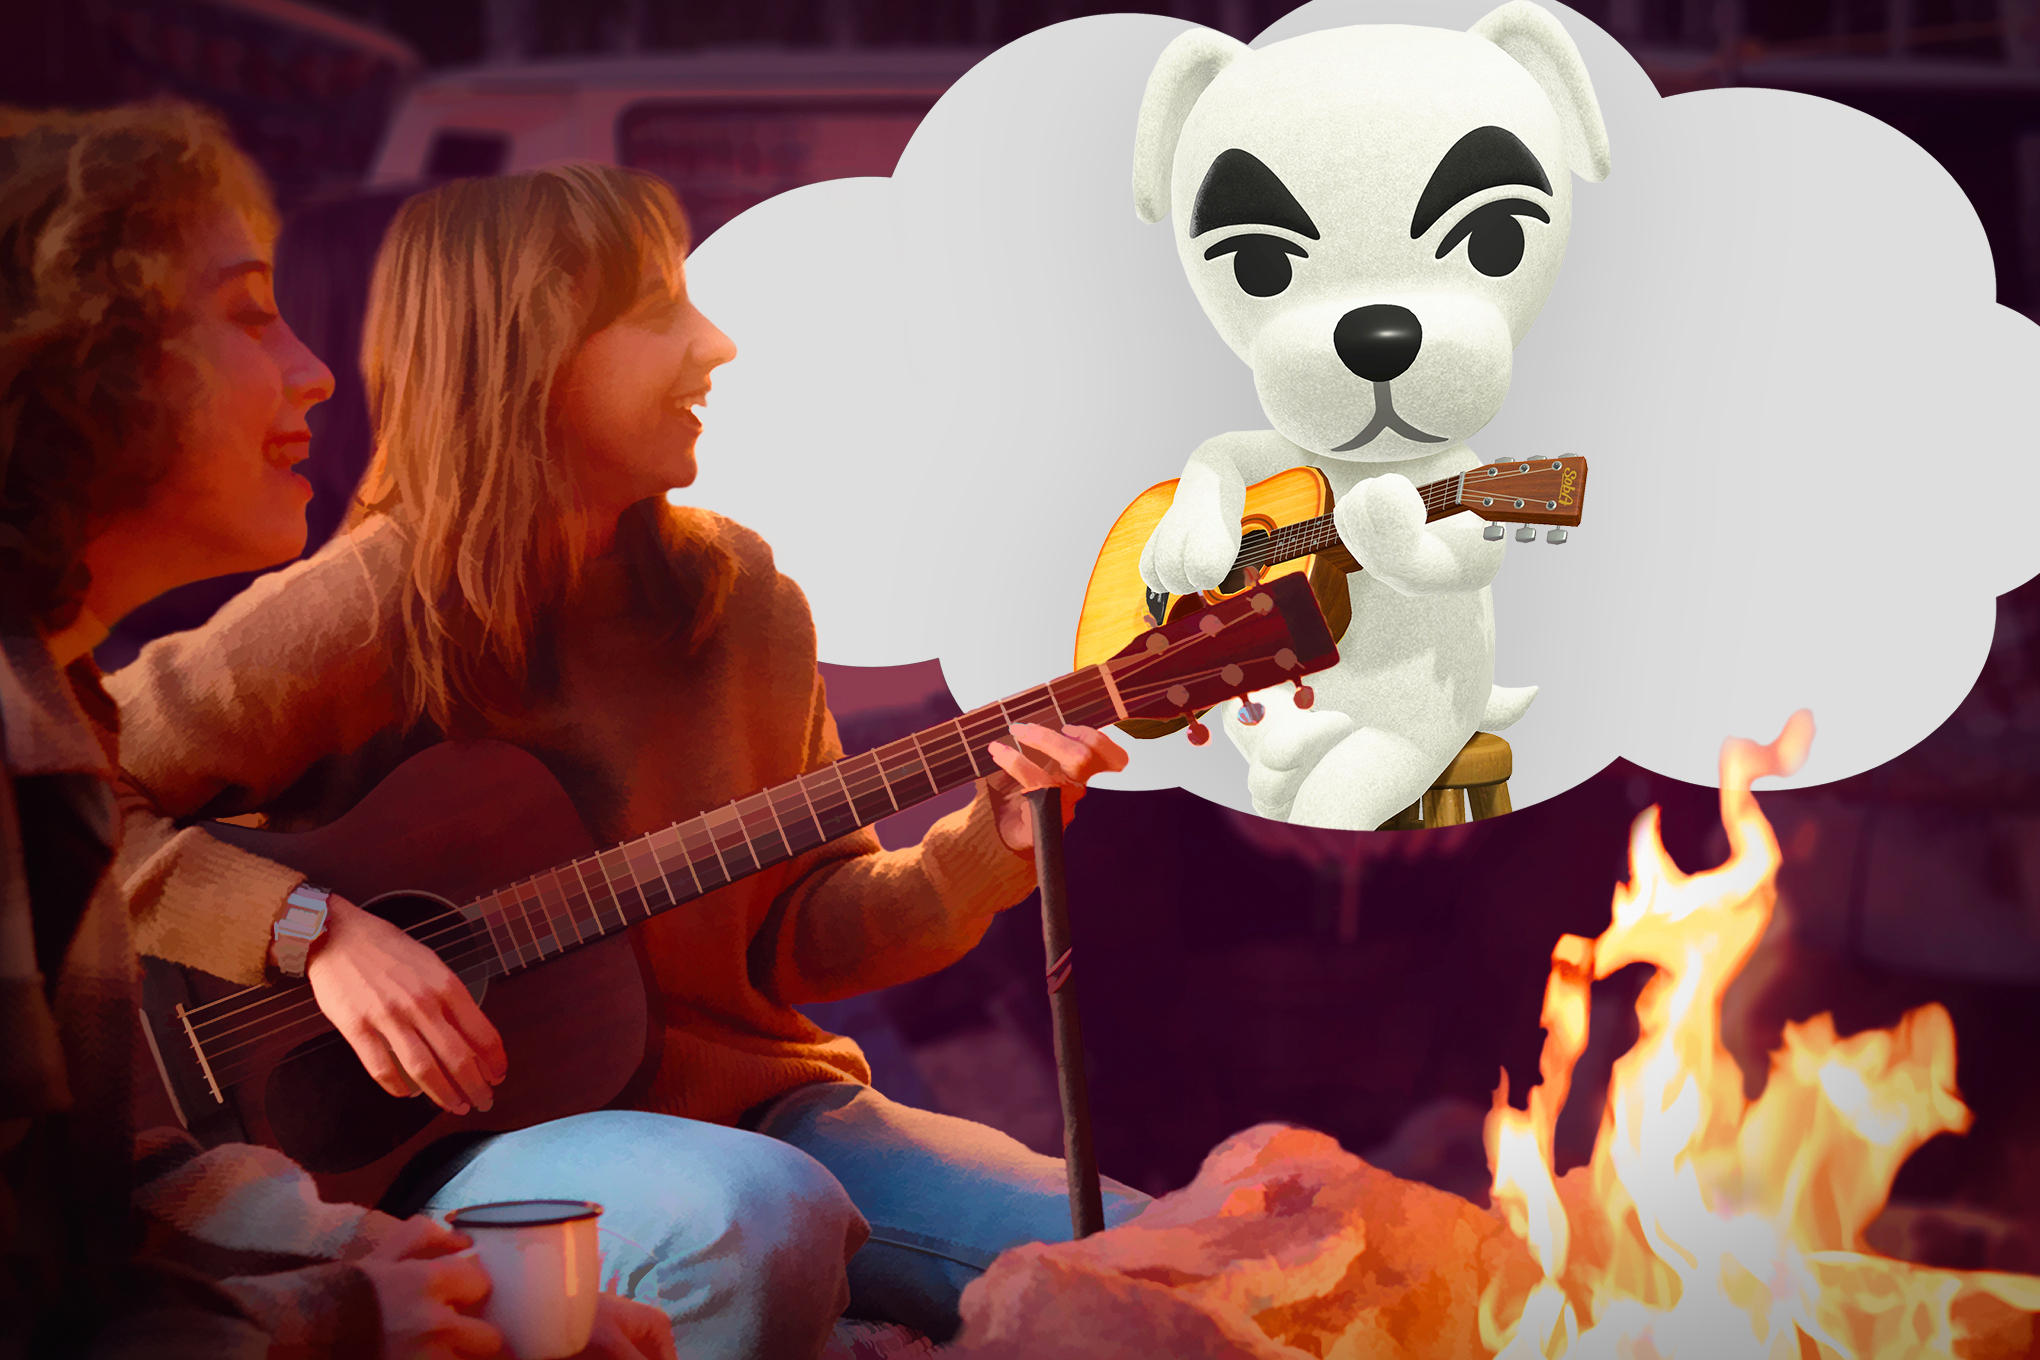 Camp goers sing and play guitar while thinking of Animal Crossing